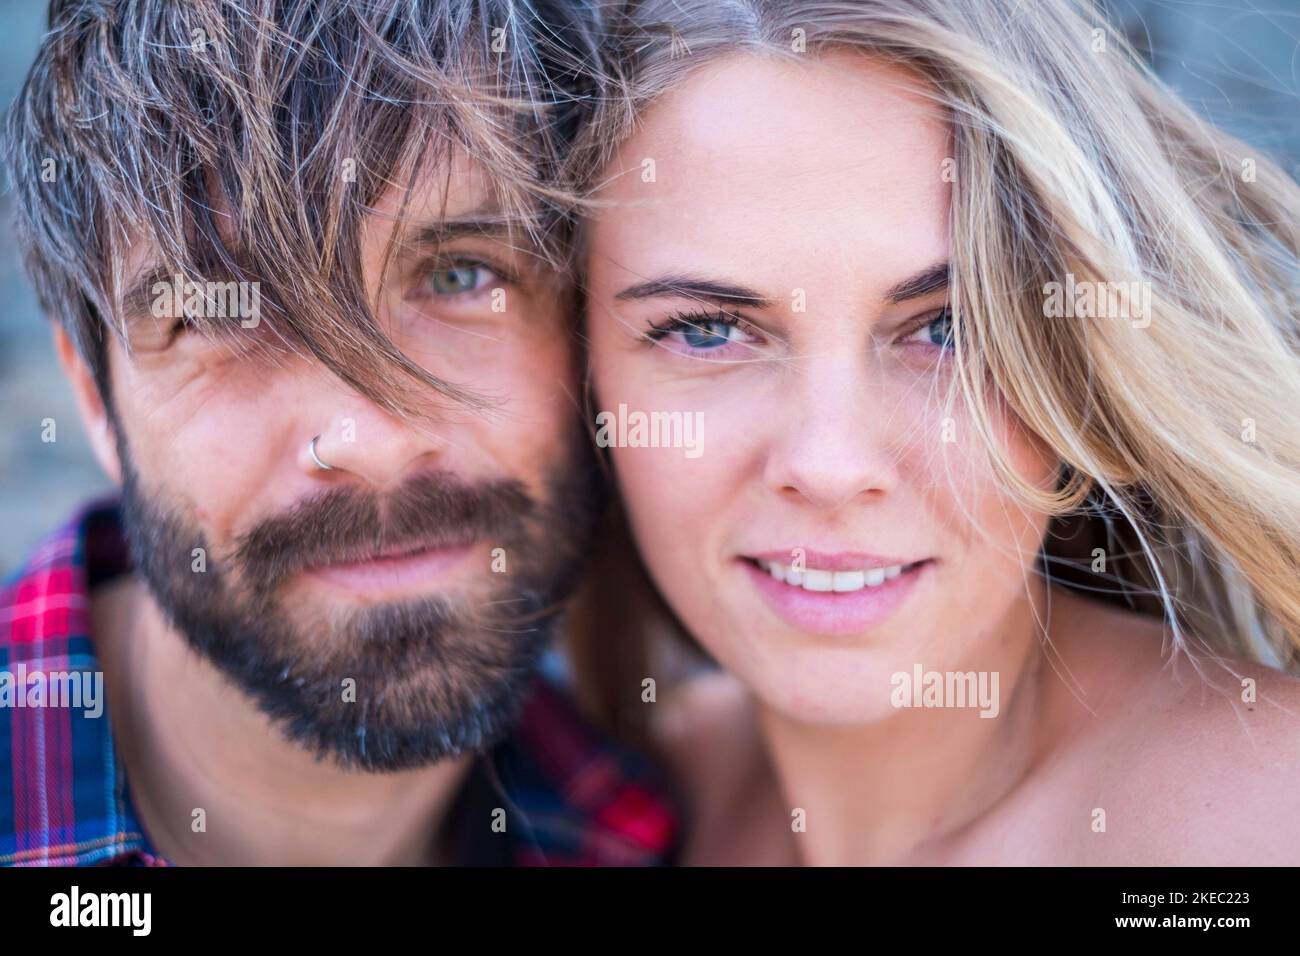 close up and portrait of beautiful and handsome man and woman togethe with their faces near each other looking at the camera smiling - blone woman with blue eyes and handsome man with green eyes Stock Photo